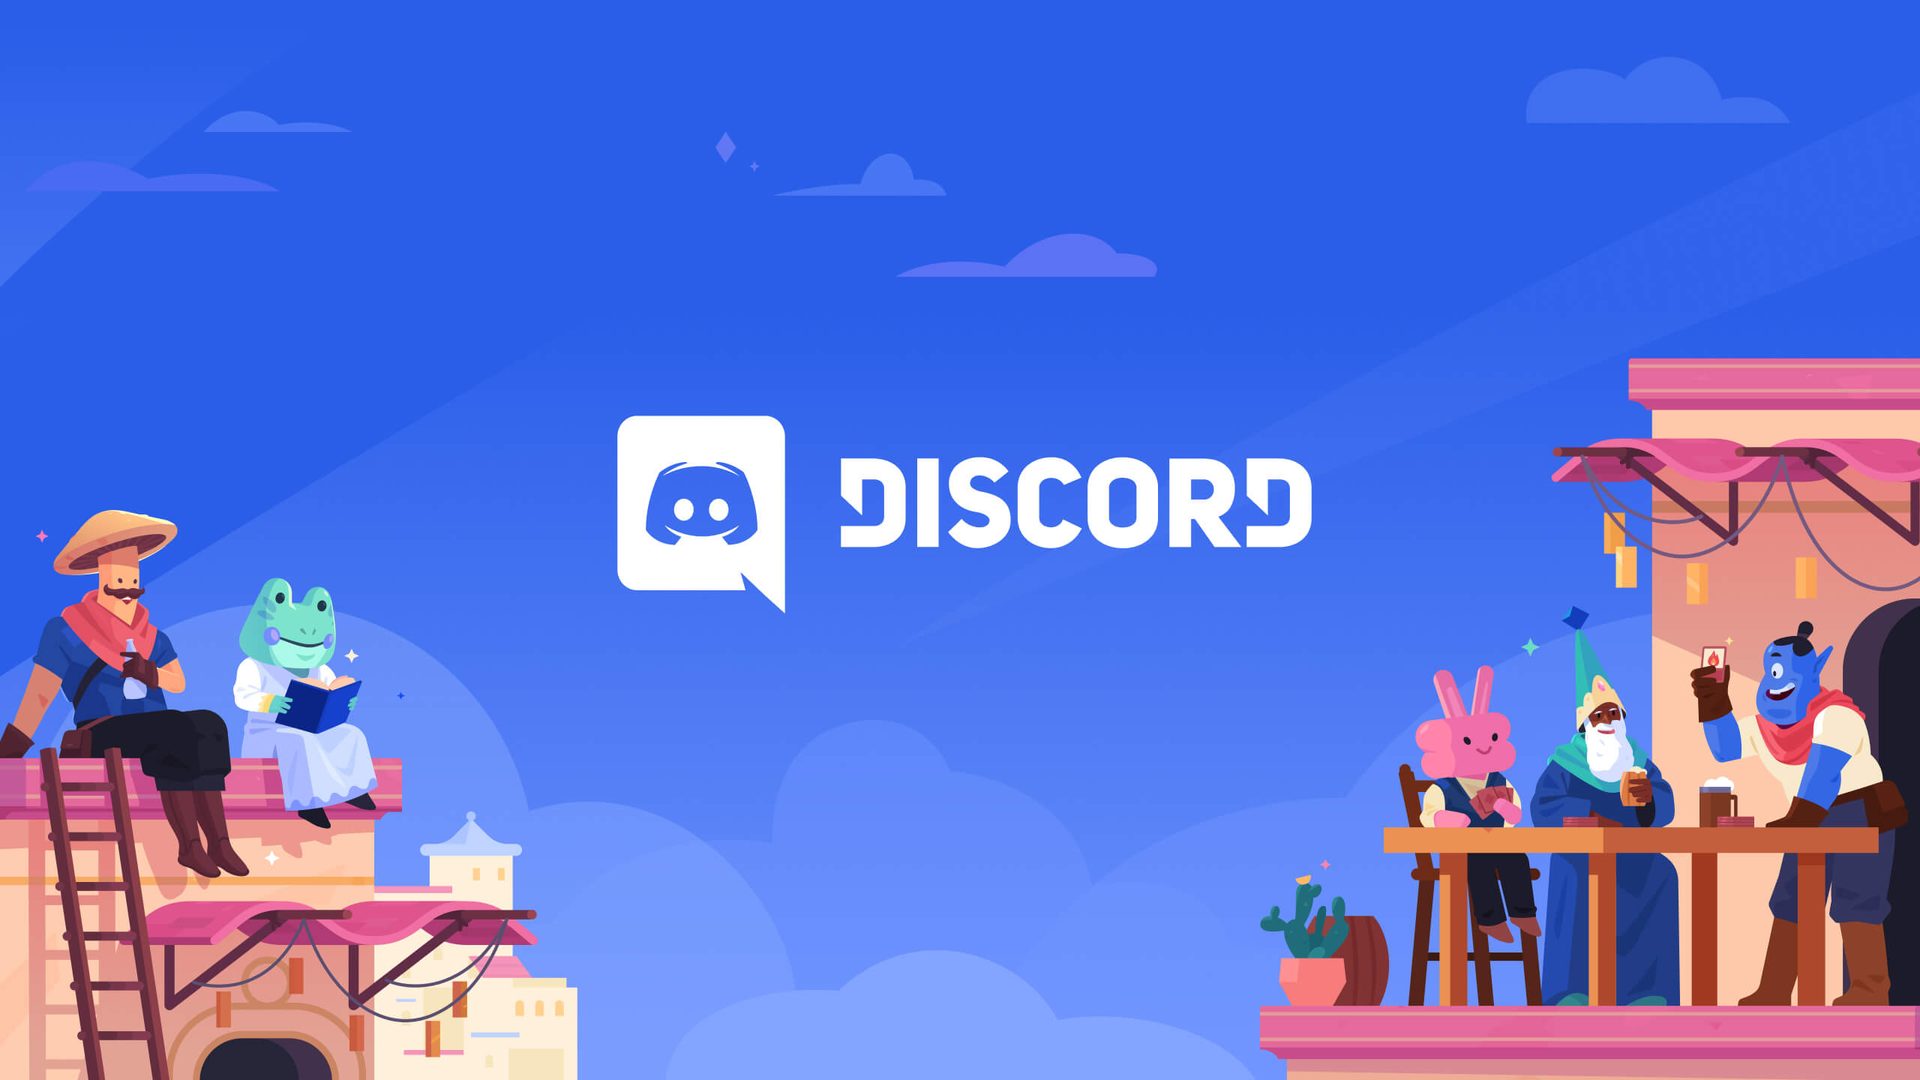 Discord Unblocked explained: How to unblock Discord?